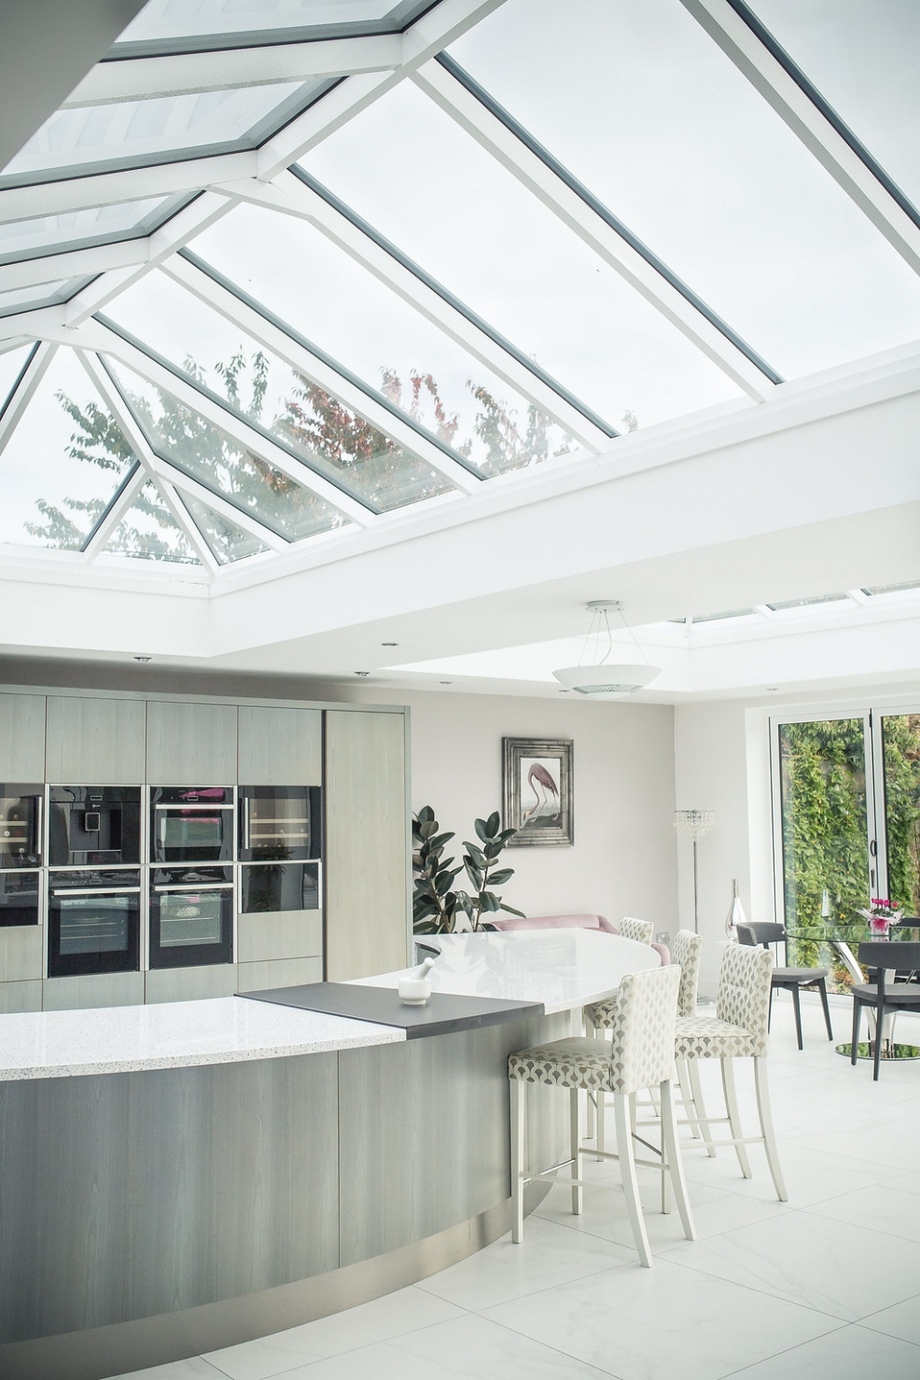 Double roof lanterns provide light where you need it most.